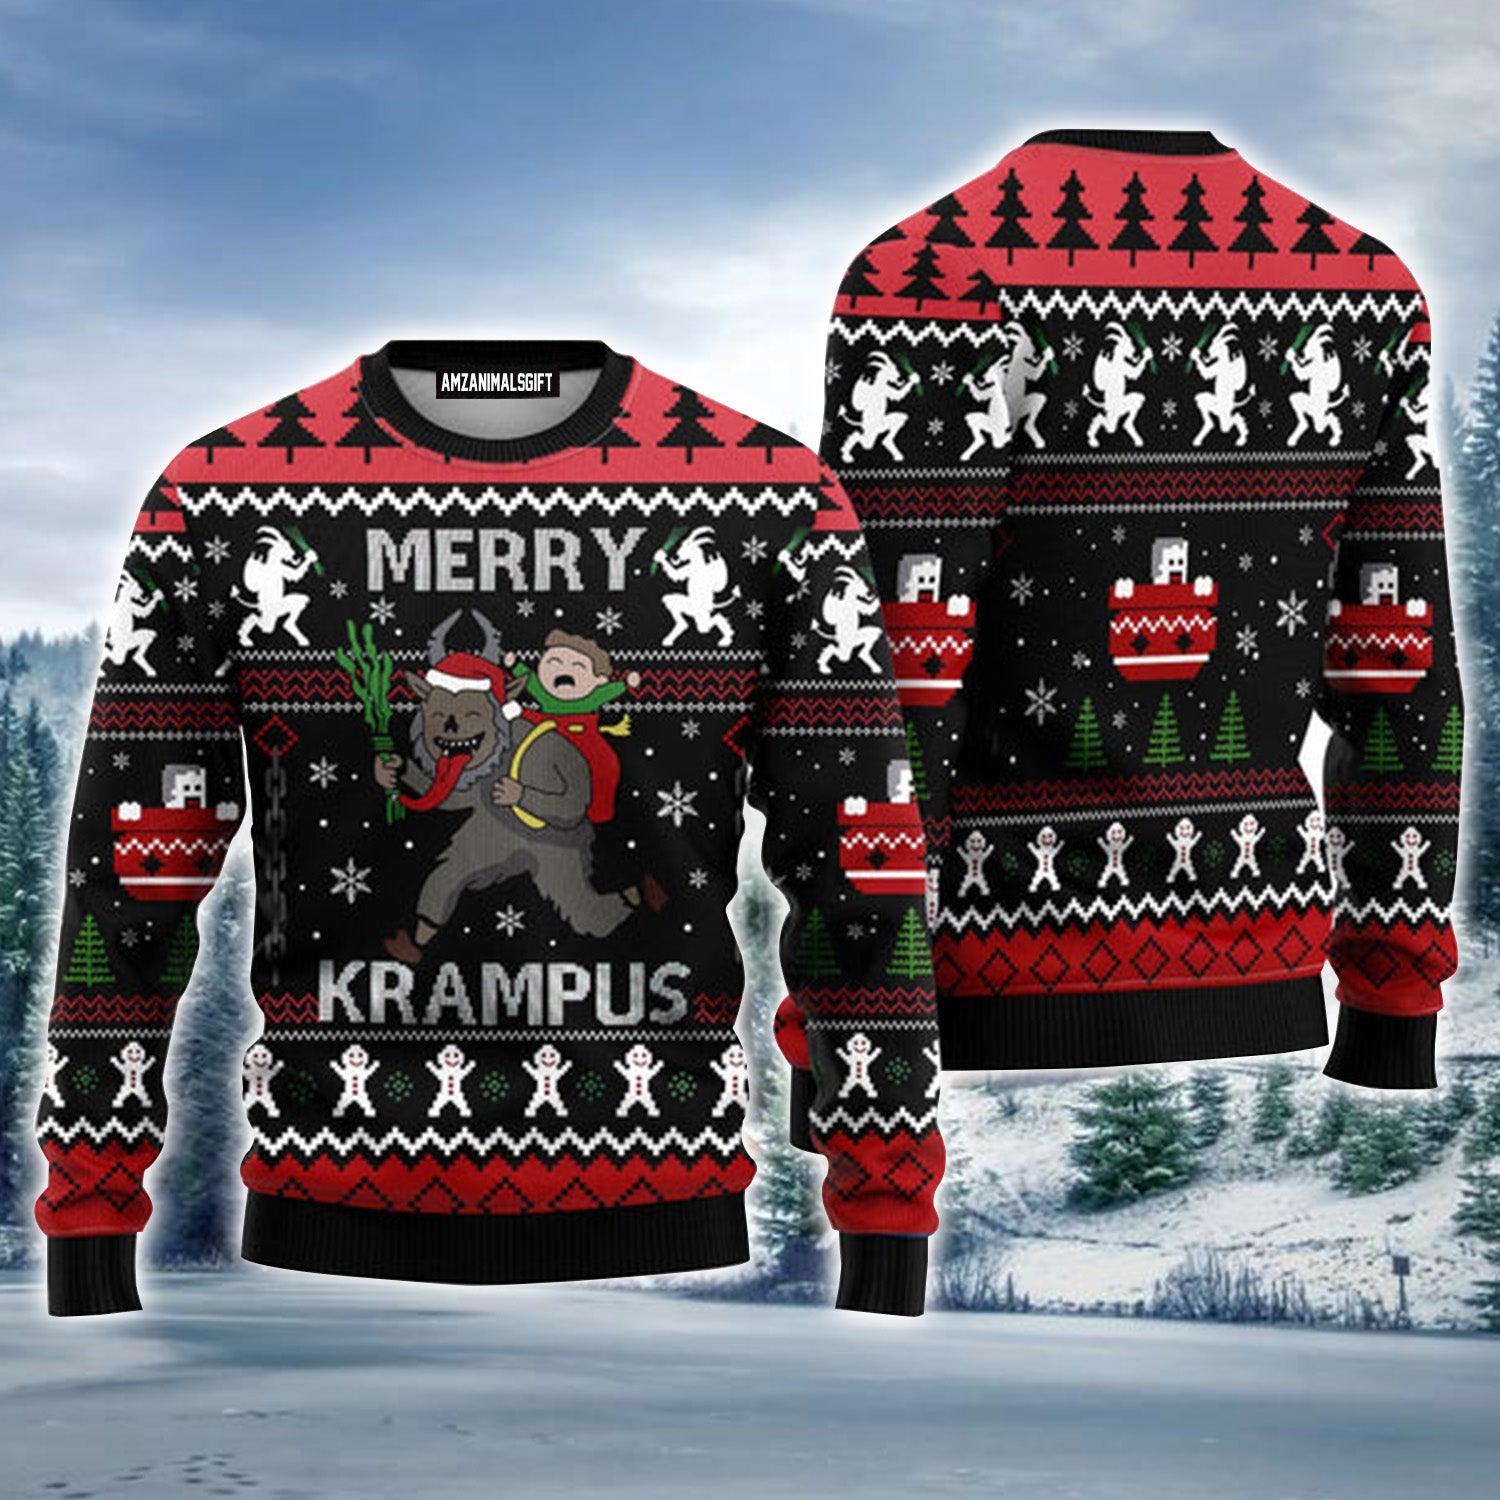 Krampus Merry Christmas Urly Christmas Sweater, Christmas Sweater For Men & Women - Perfect Gift For Christmas, New Year, Winter Holiday